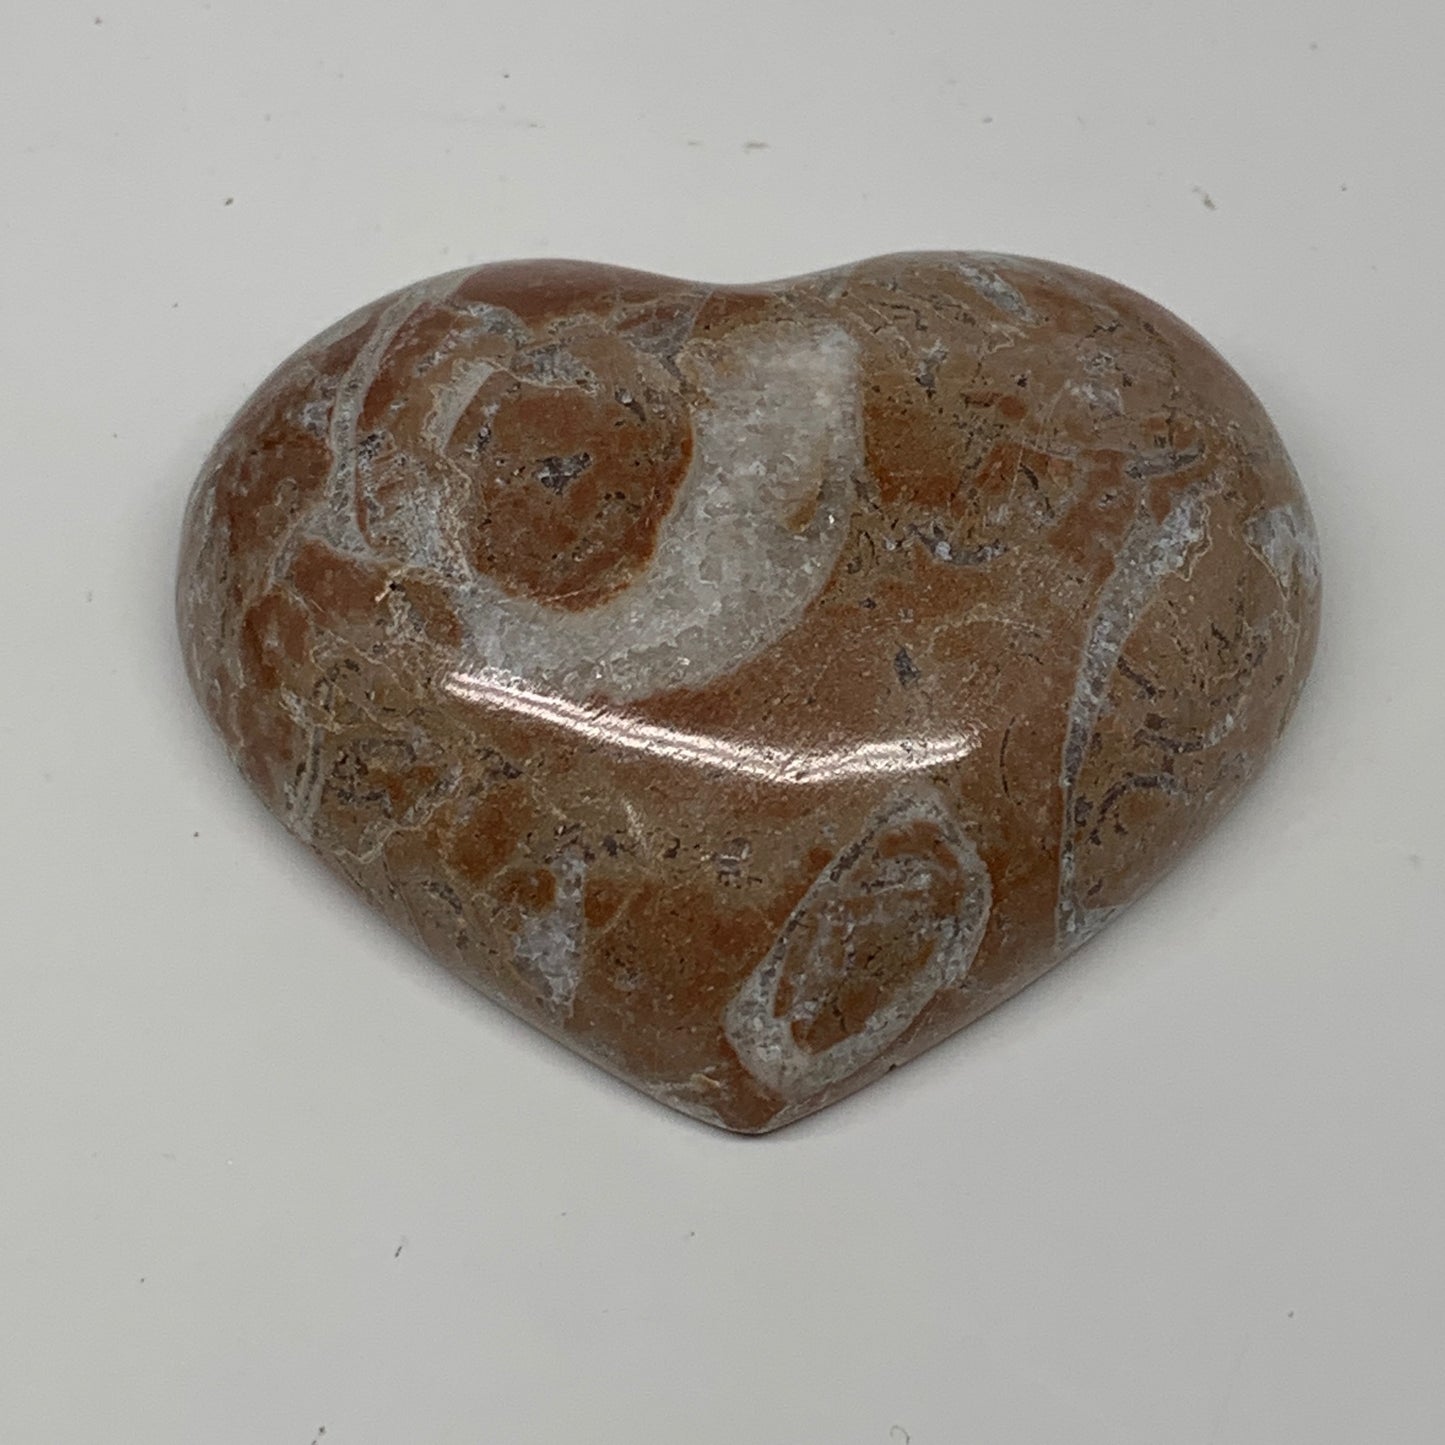 57.2g, 1.8" x 2.2"x 0.6", Natural Untreated Red Shell Fossils Half Heart @Morocc